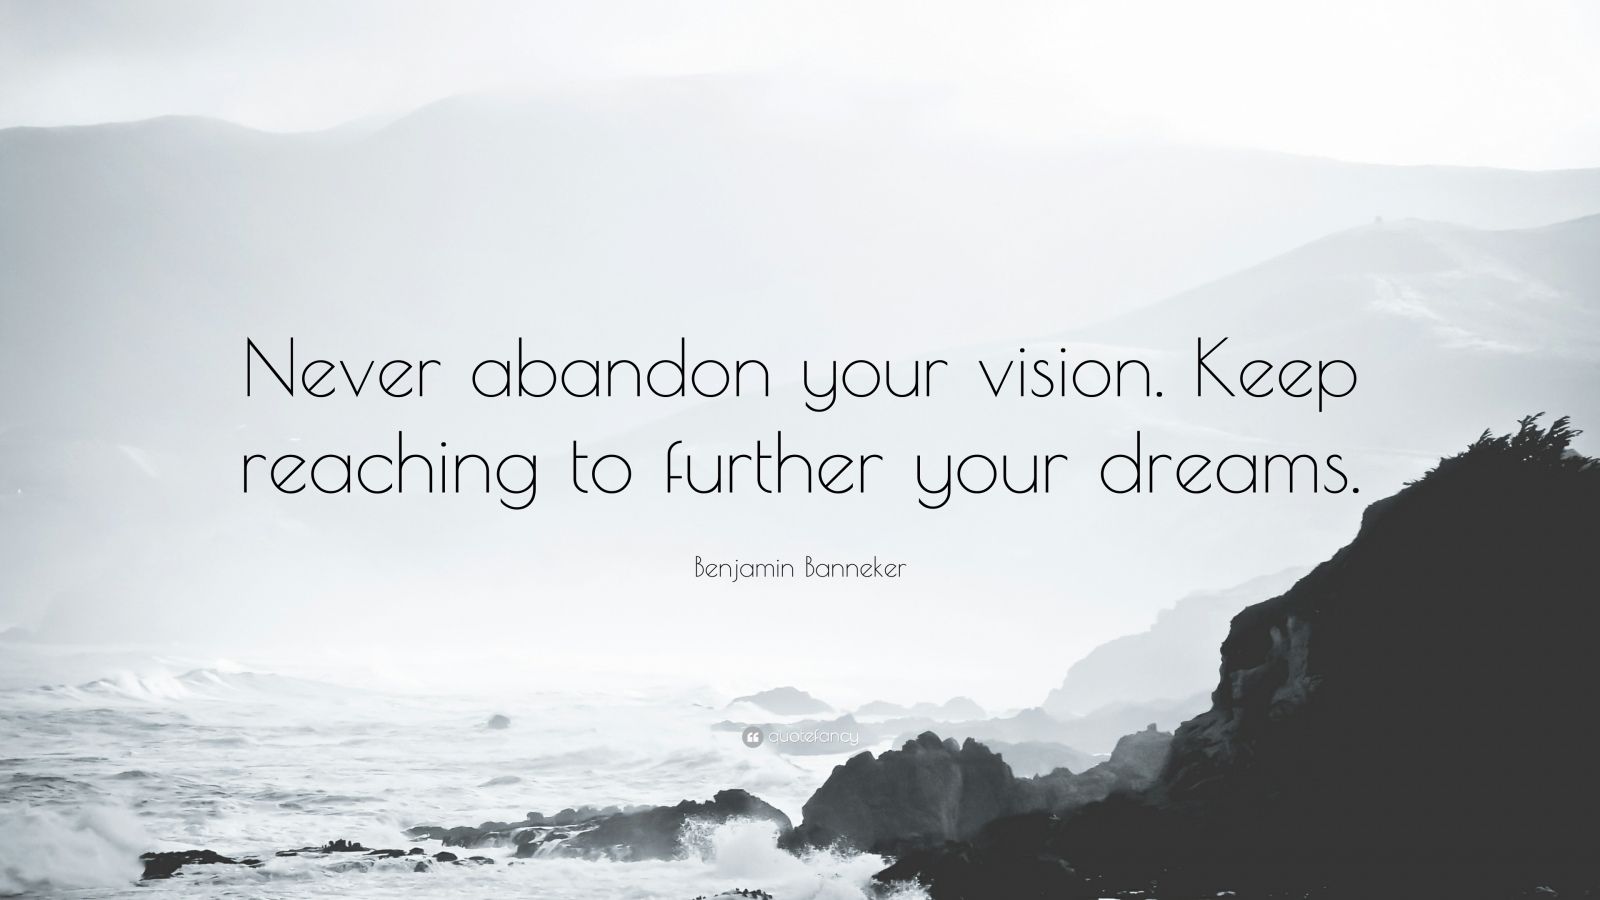 Benjamin Banneker Quote: “Never abandon your vision. Keep reaching to